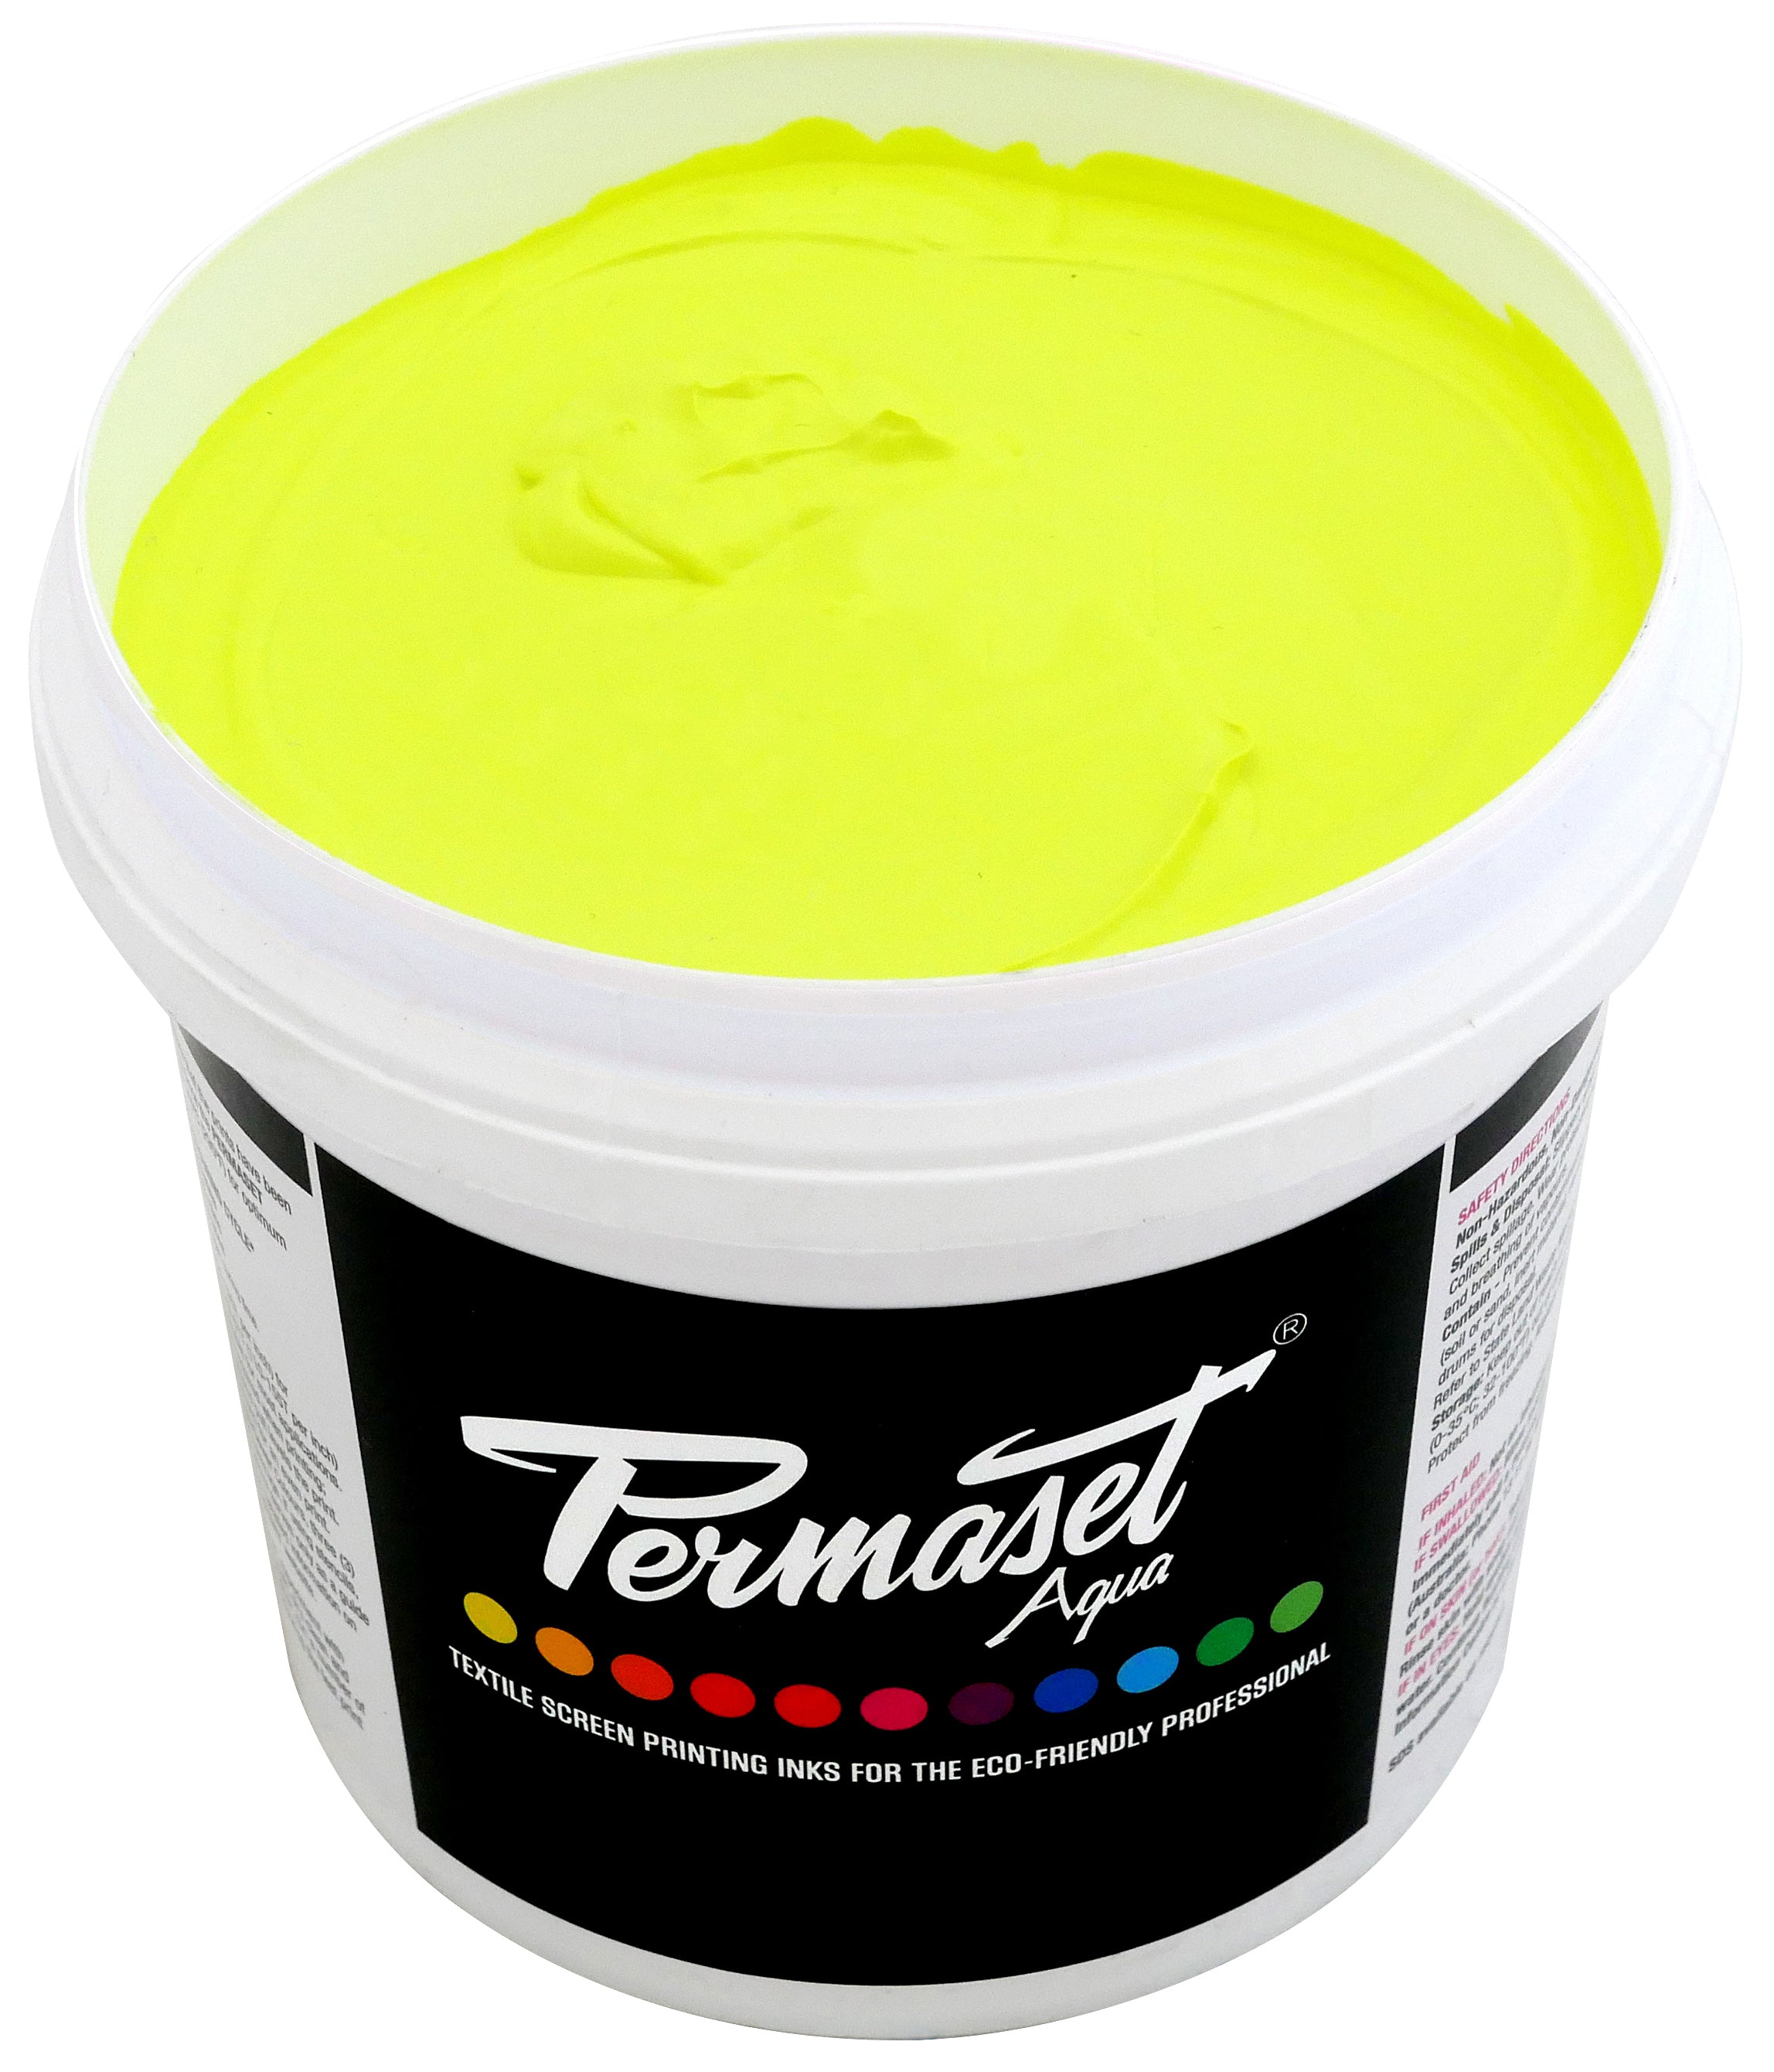 Screen Printing Inks for Textile & Plastic